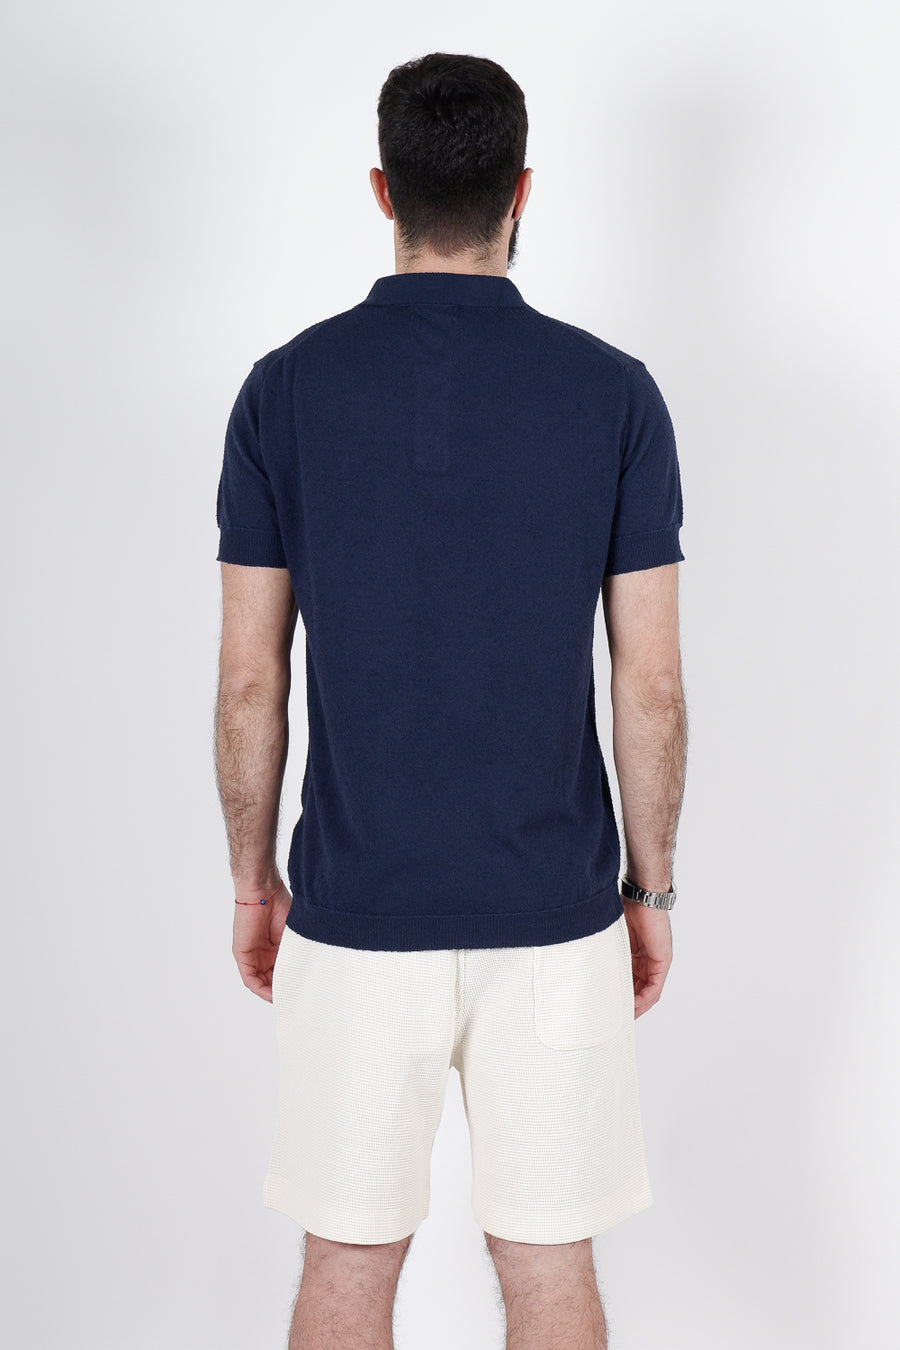 Buy the Daniele Fiesoli Polo Neck T-Shirt in Navy at Intro. Spend £50 for free UK delivery. Official stockists. We ship worldwide.